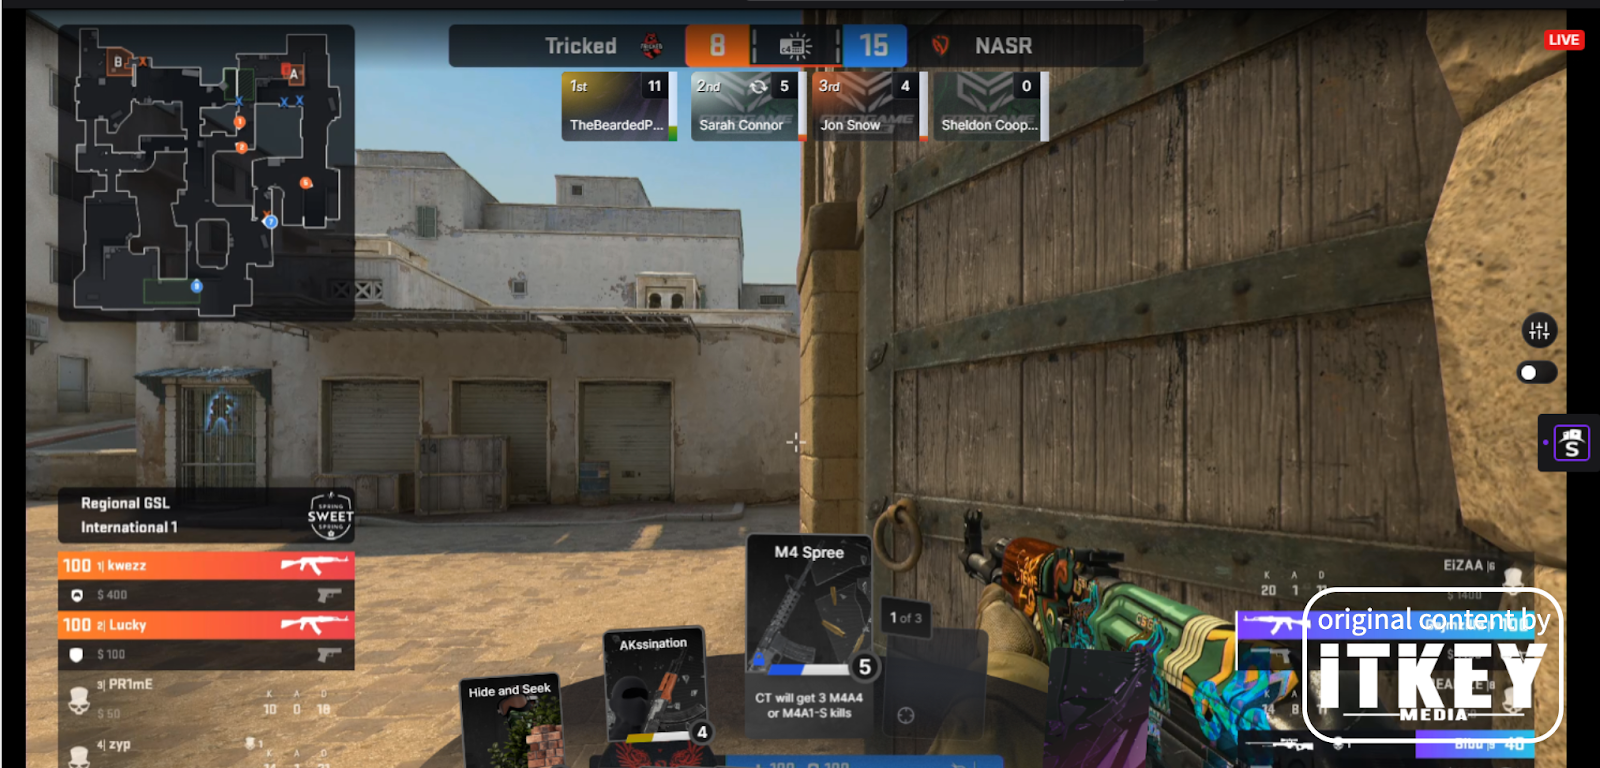 StreamCards Show Us a Glimpse of What the Next Stage in Interactive Streaming Might Look Like